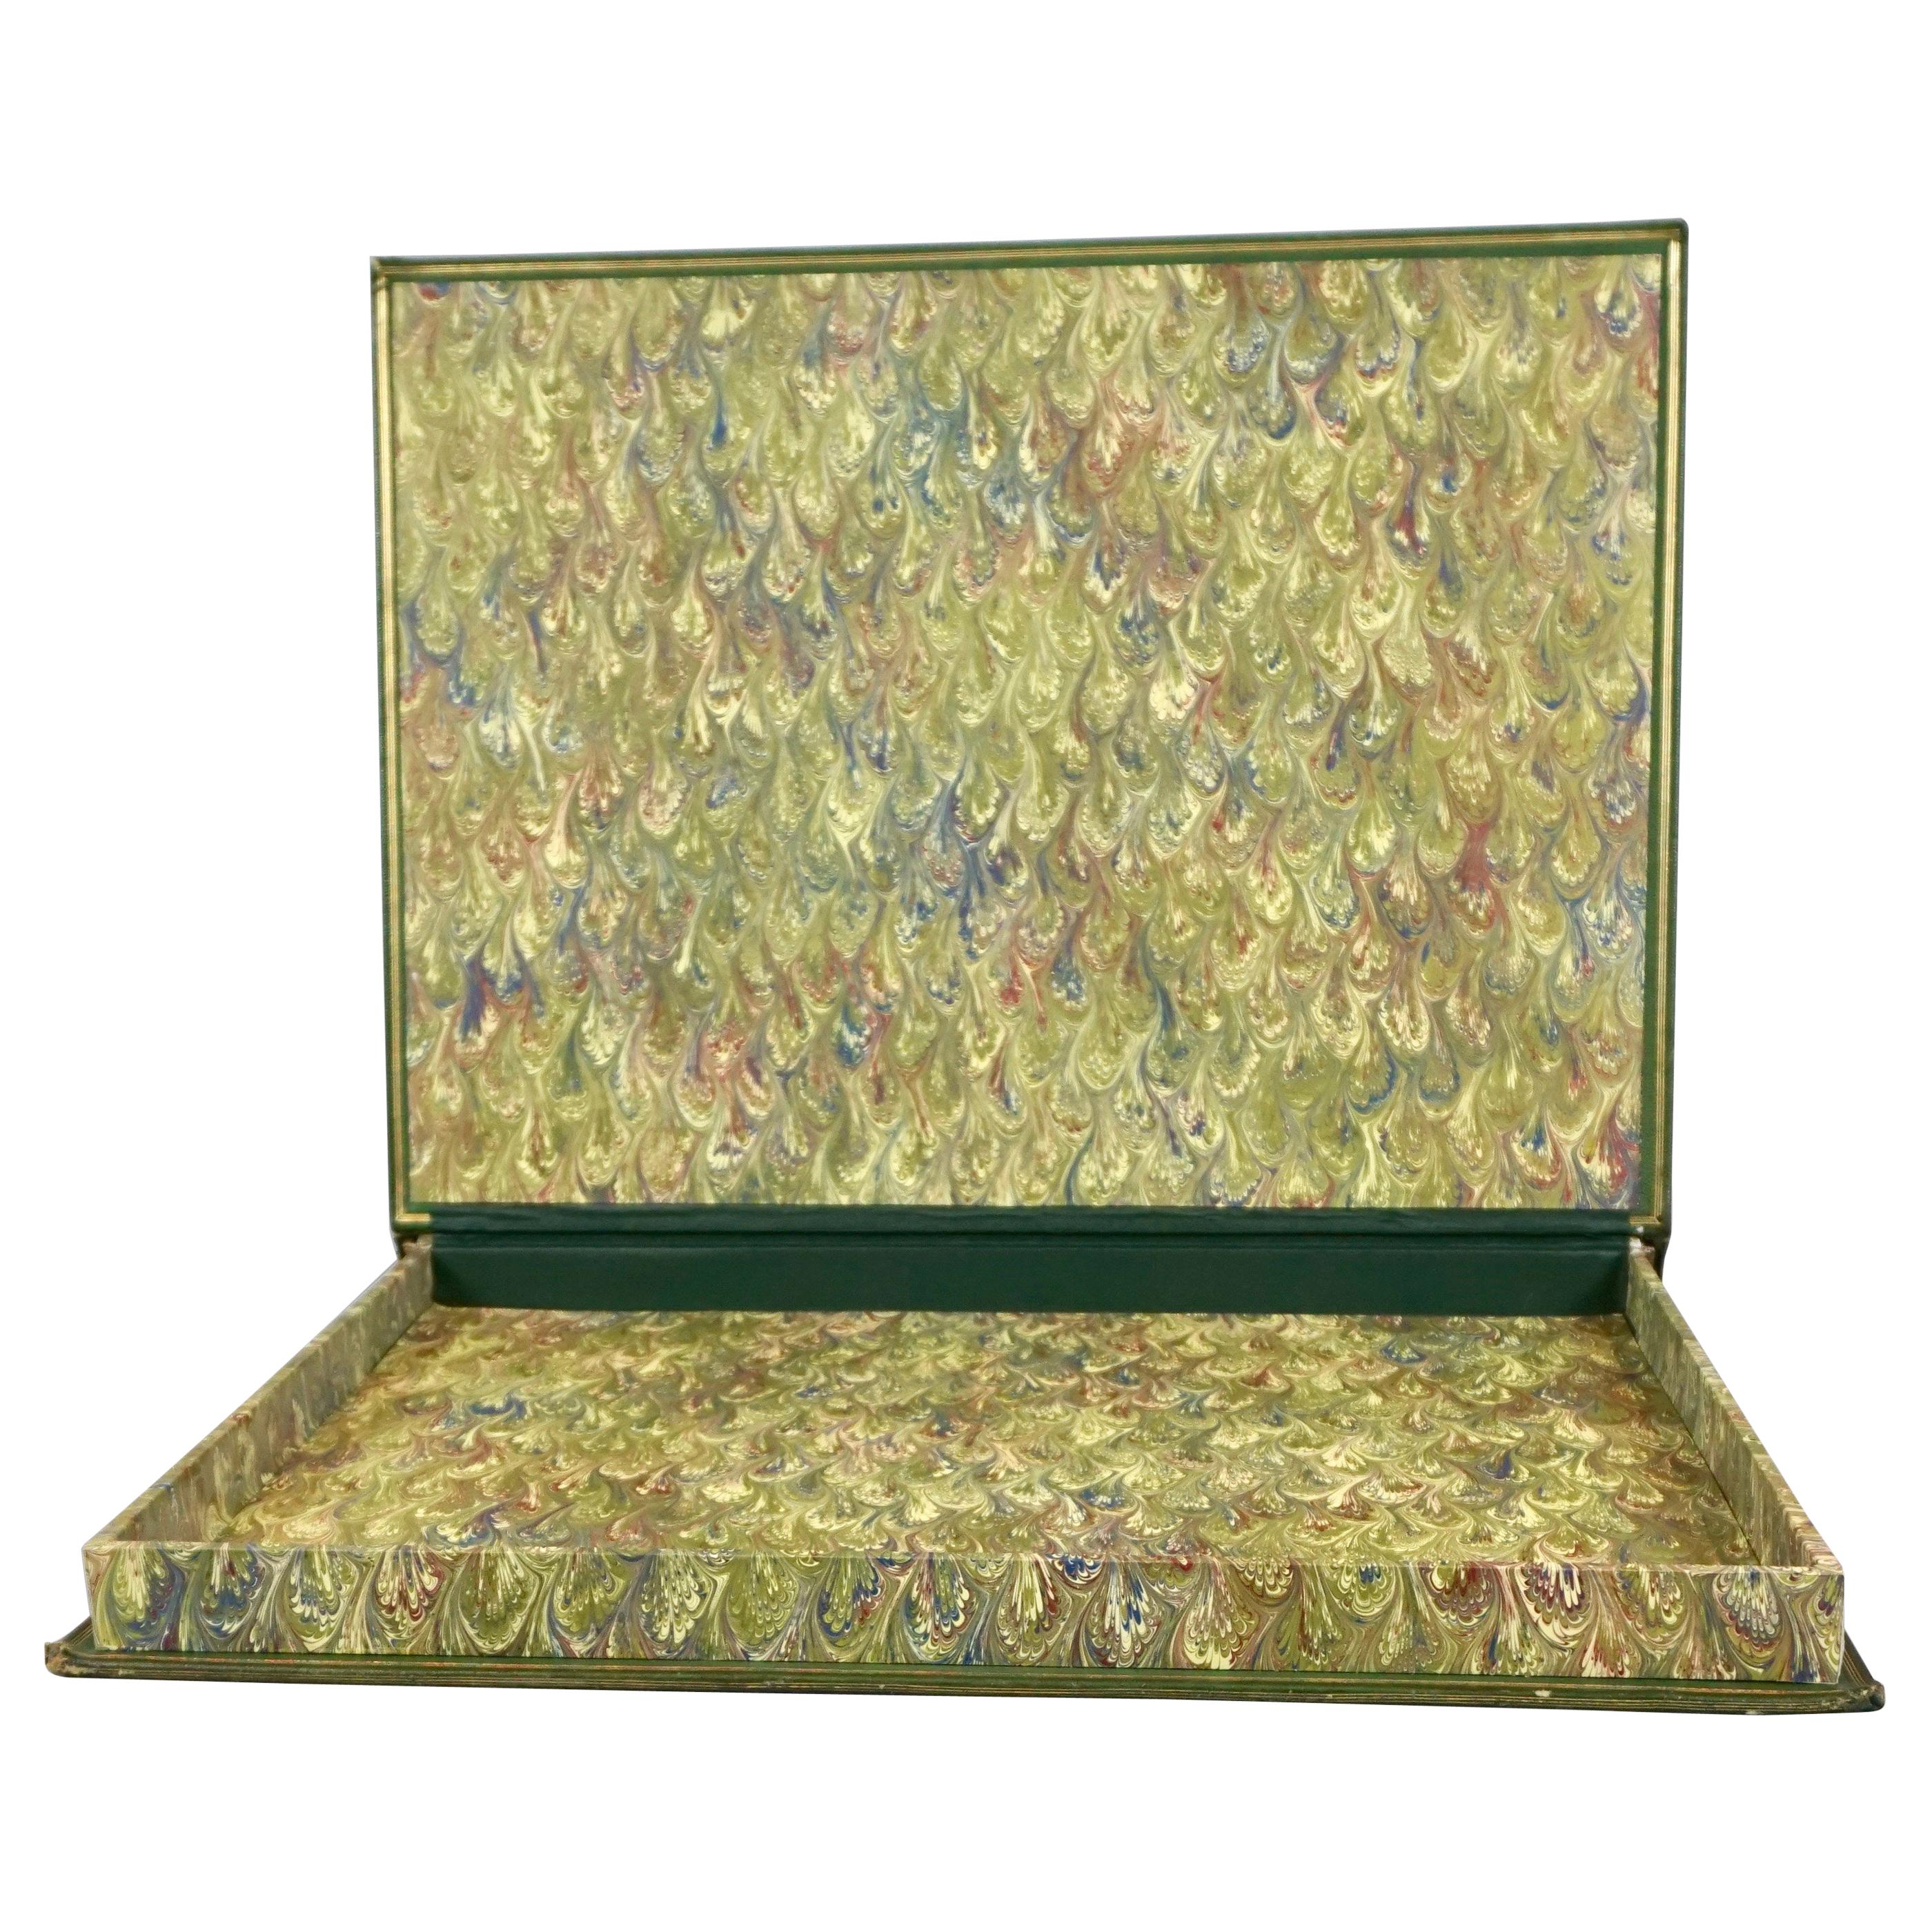 Green Morocco Leather Elephant Folio Book Cover Now A Marbleized Paper Lined Box